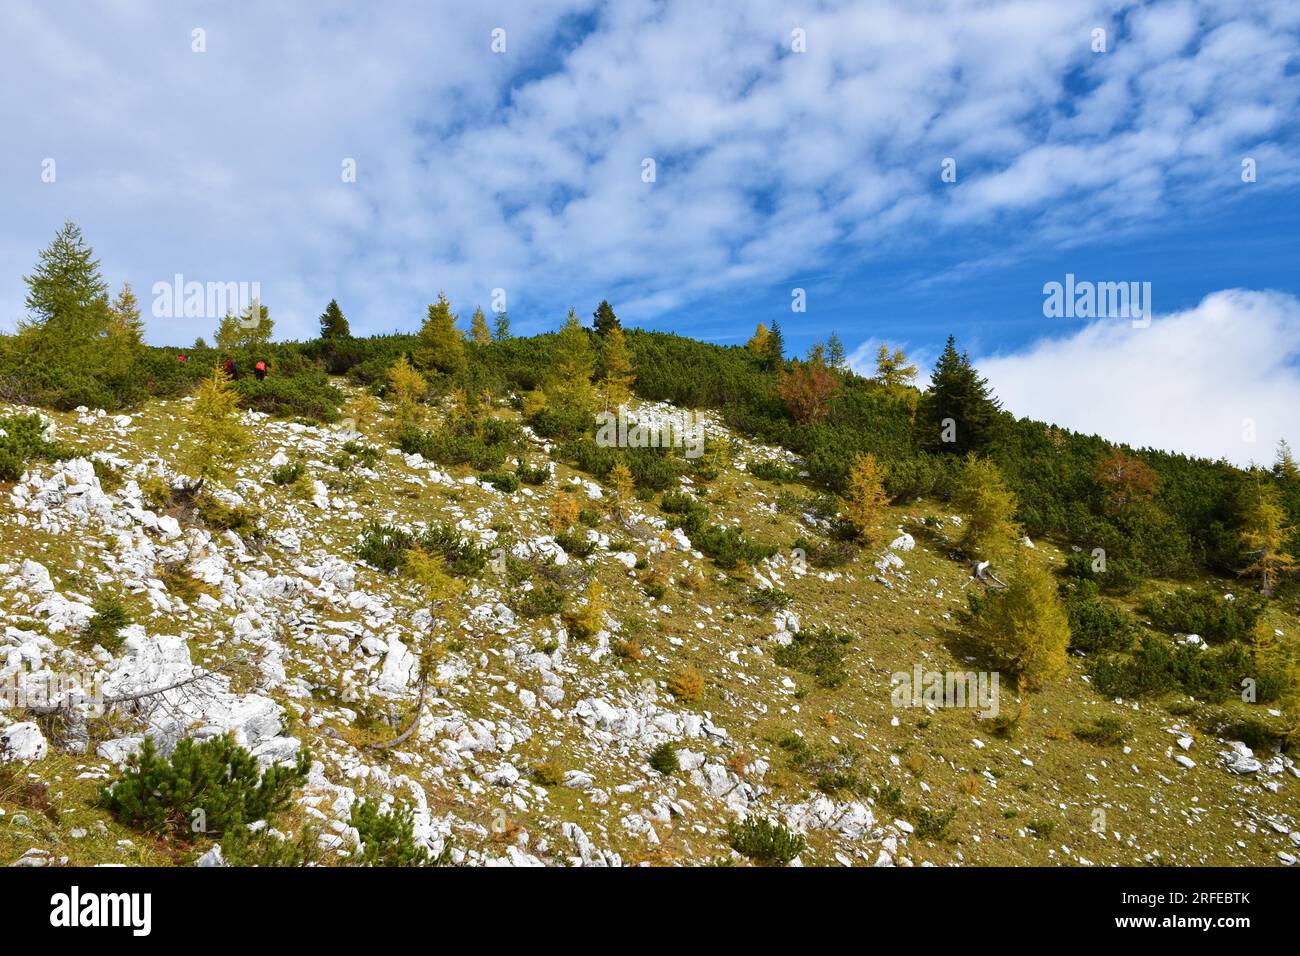 Alpine landscape in Julian alps with mugo pine and yellow colored larch trees Stock Photo